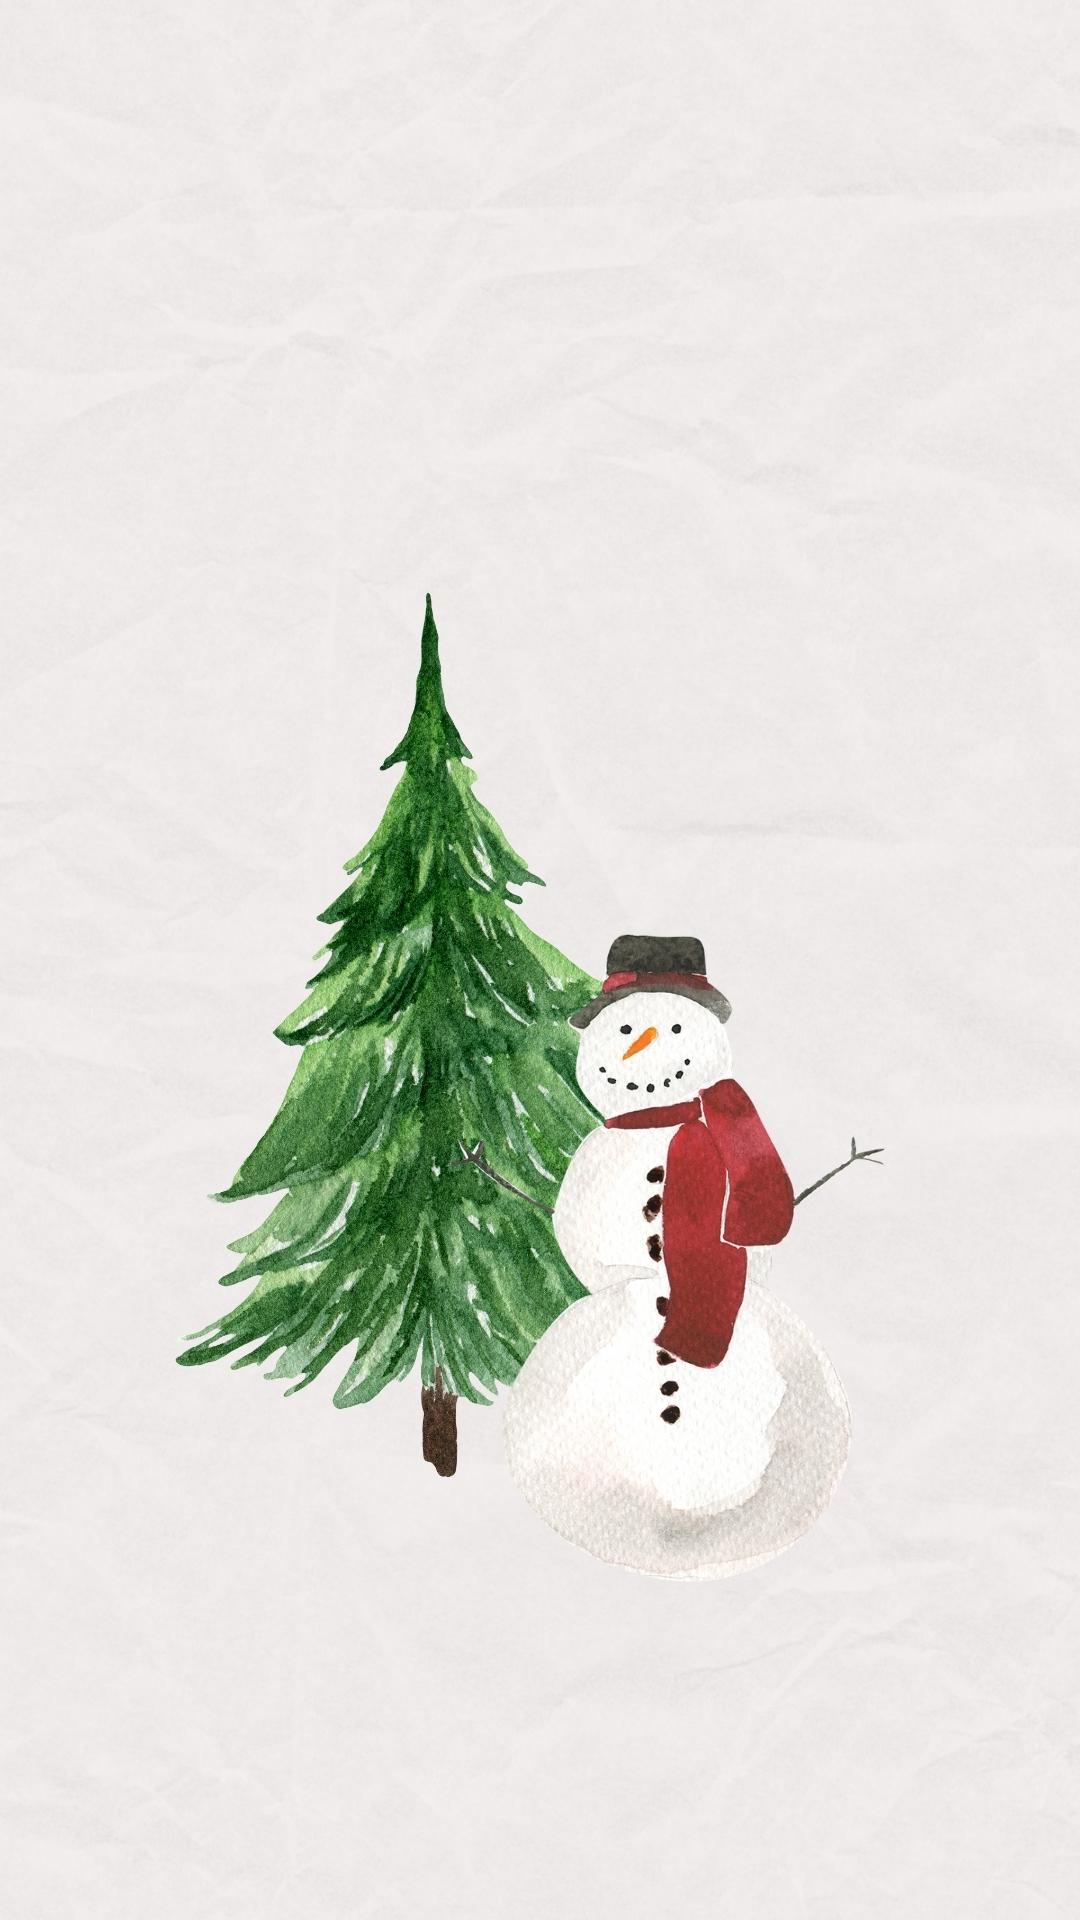 Background for your phone featuring a winter snowman and pine tree.